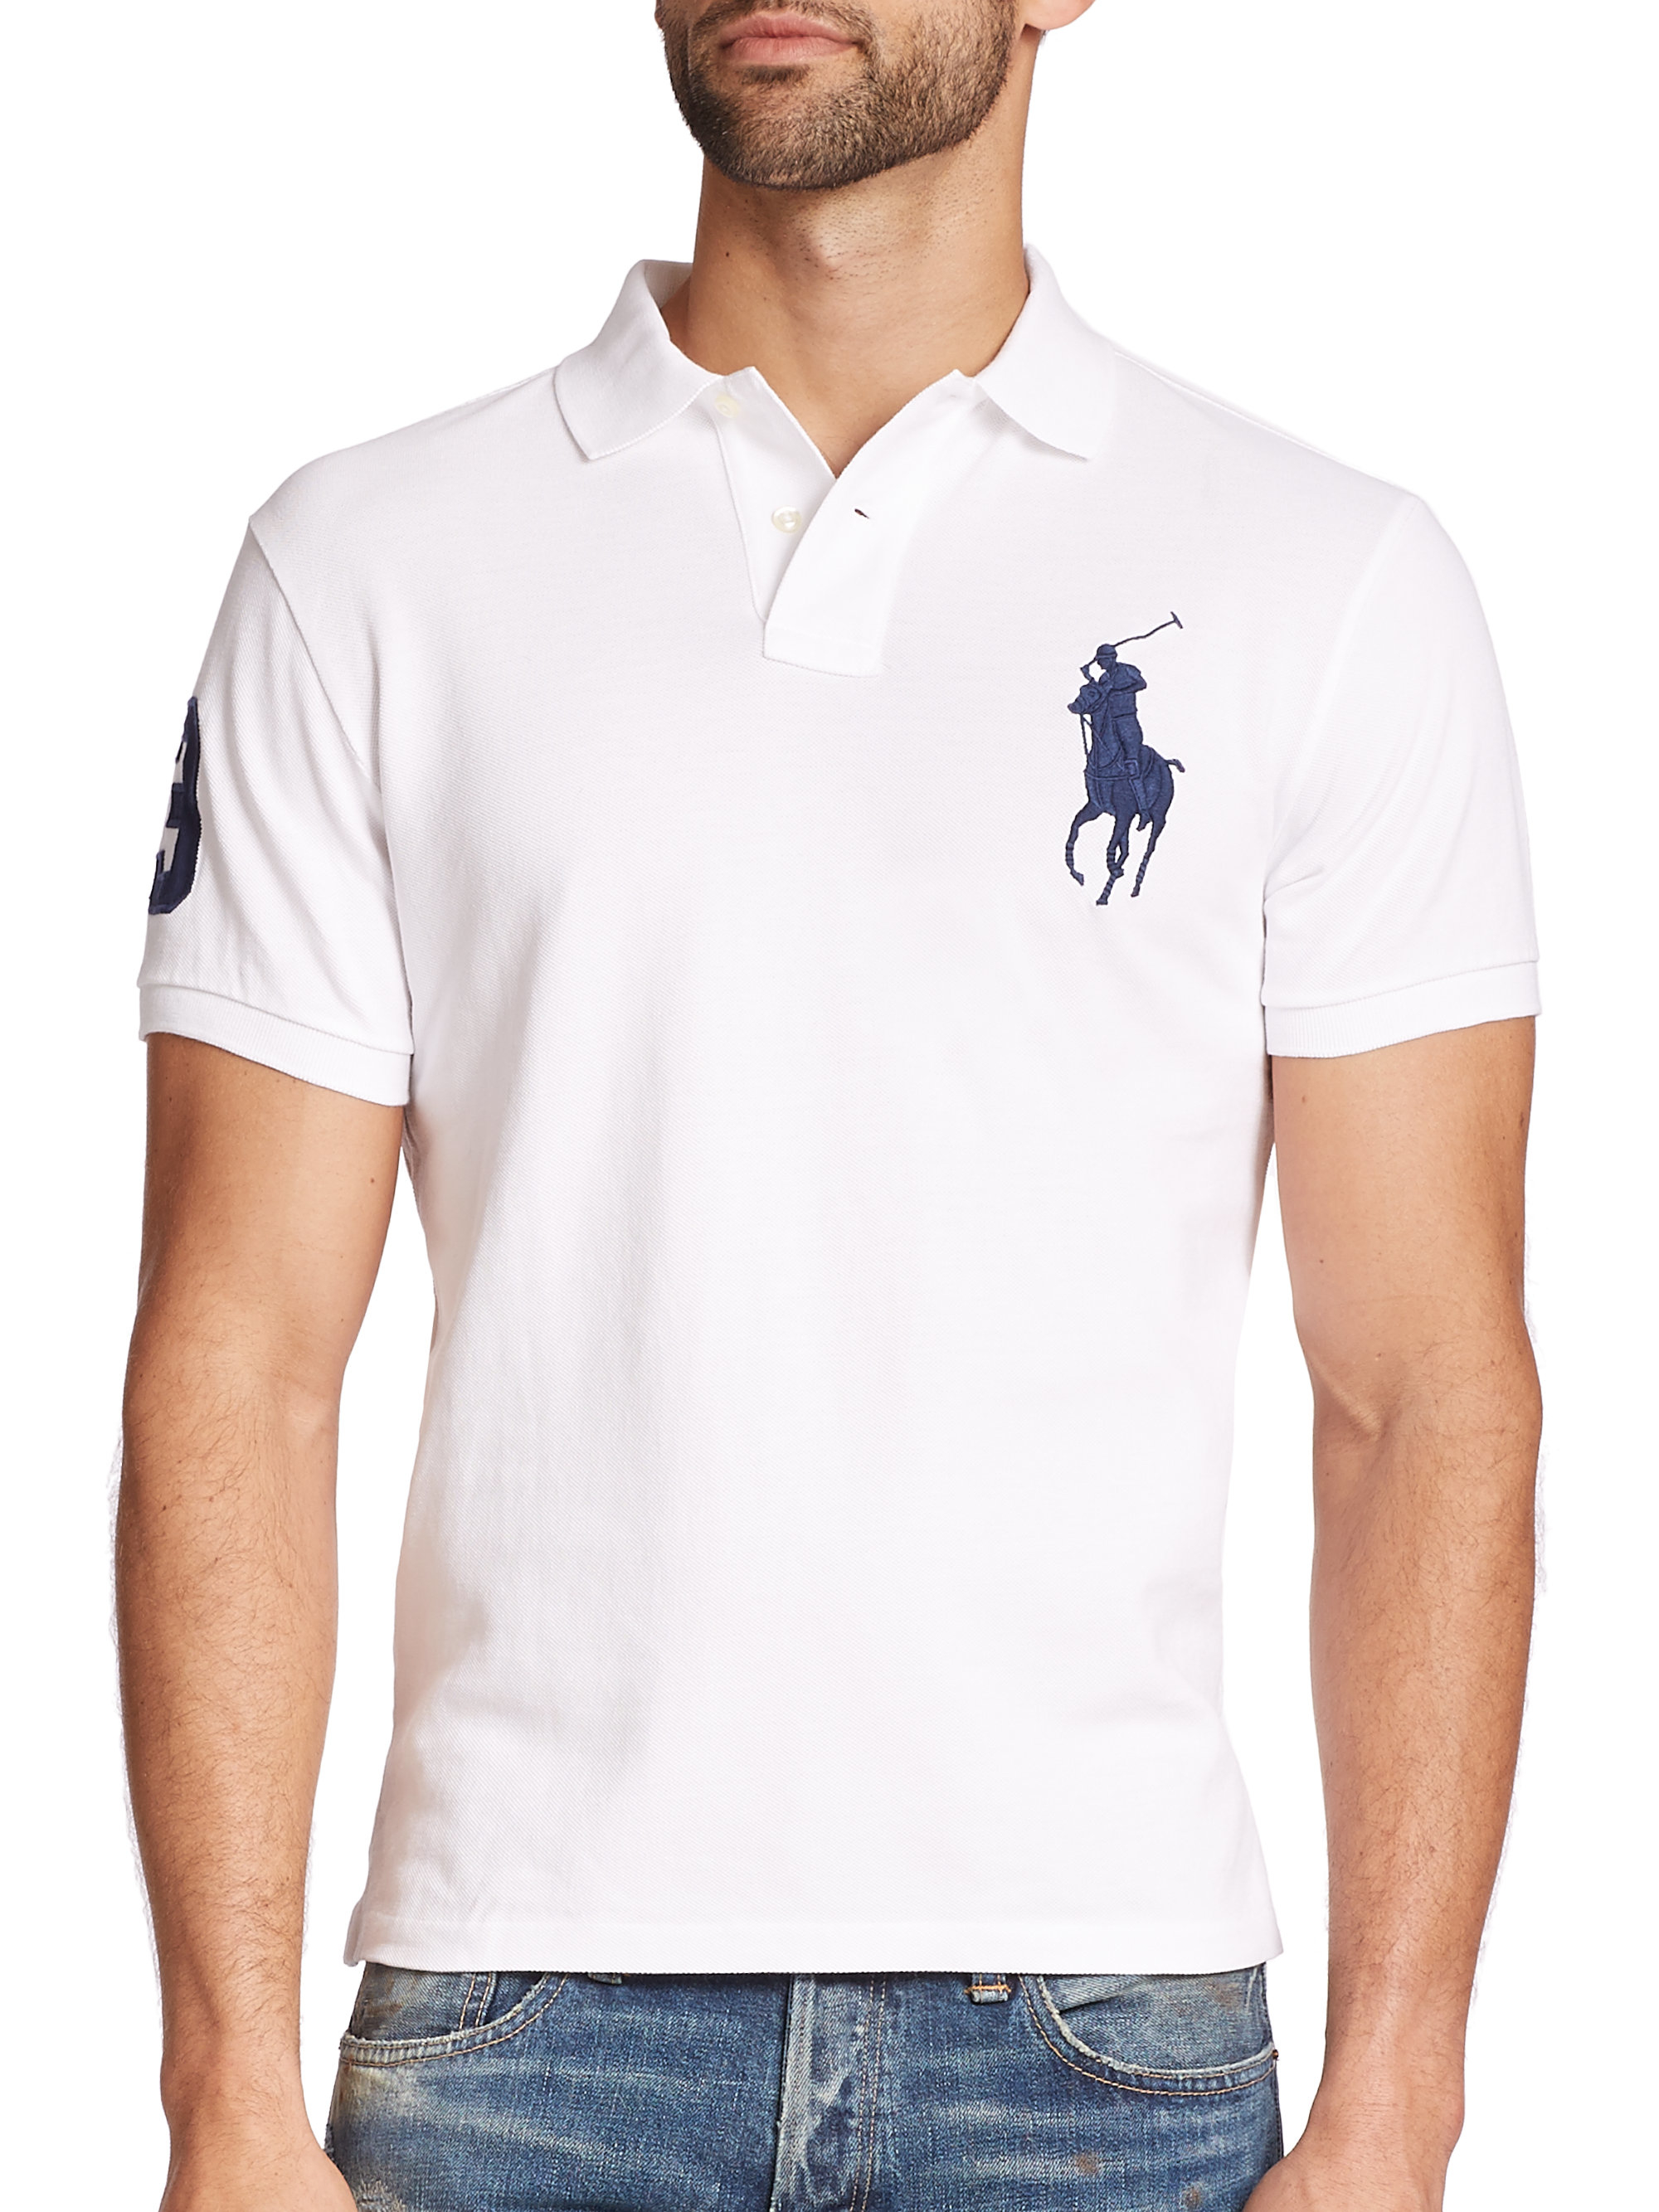 Polo ralph lauren Custom-fit Big Pony Mesh Polo in White for Men - Save